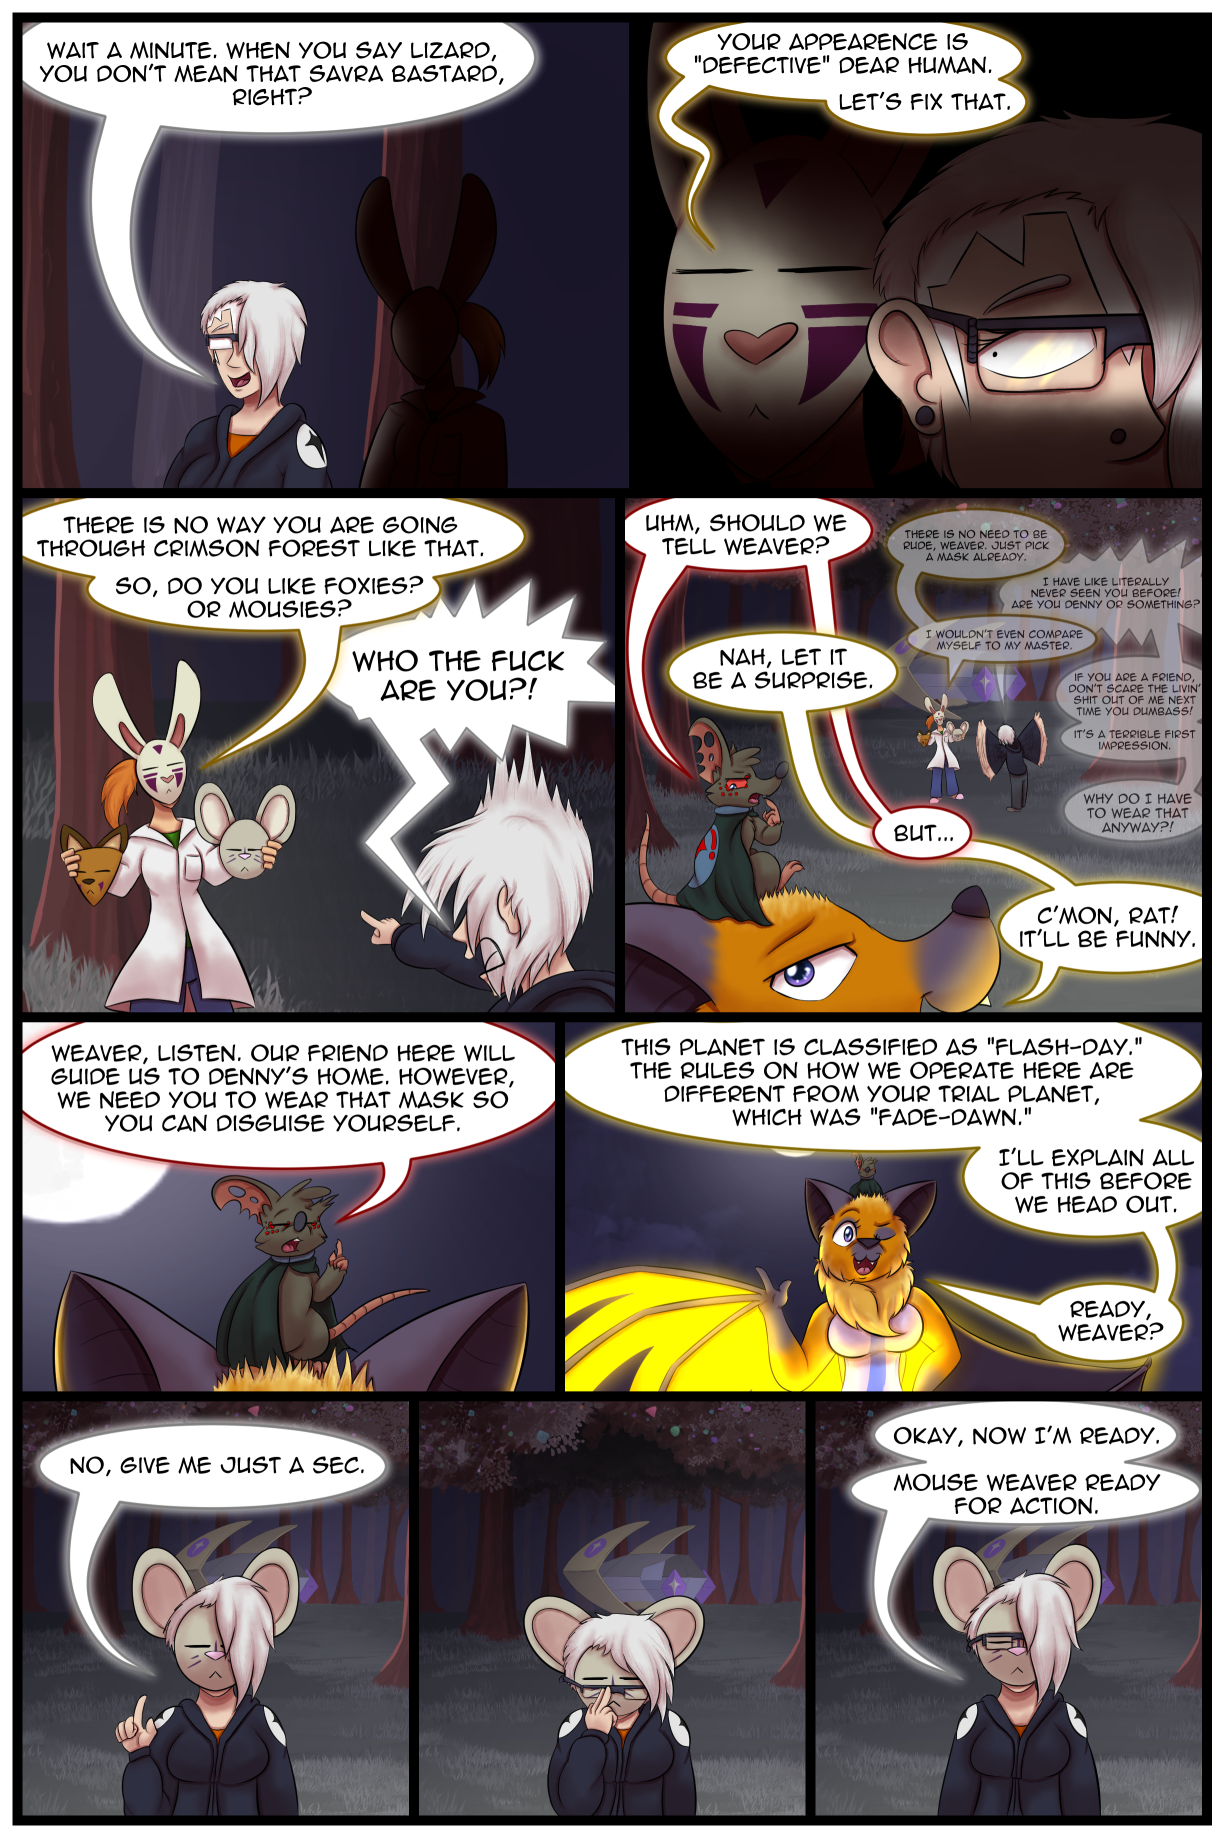 Ch5 Page 6 – Masked